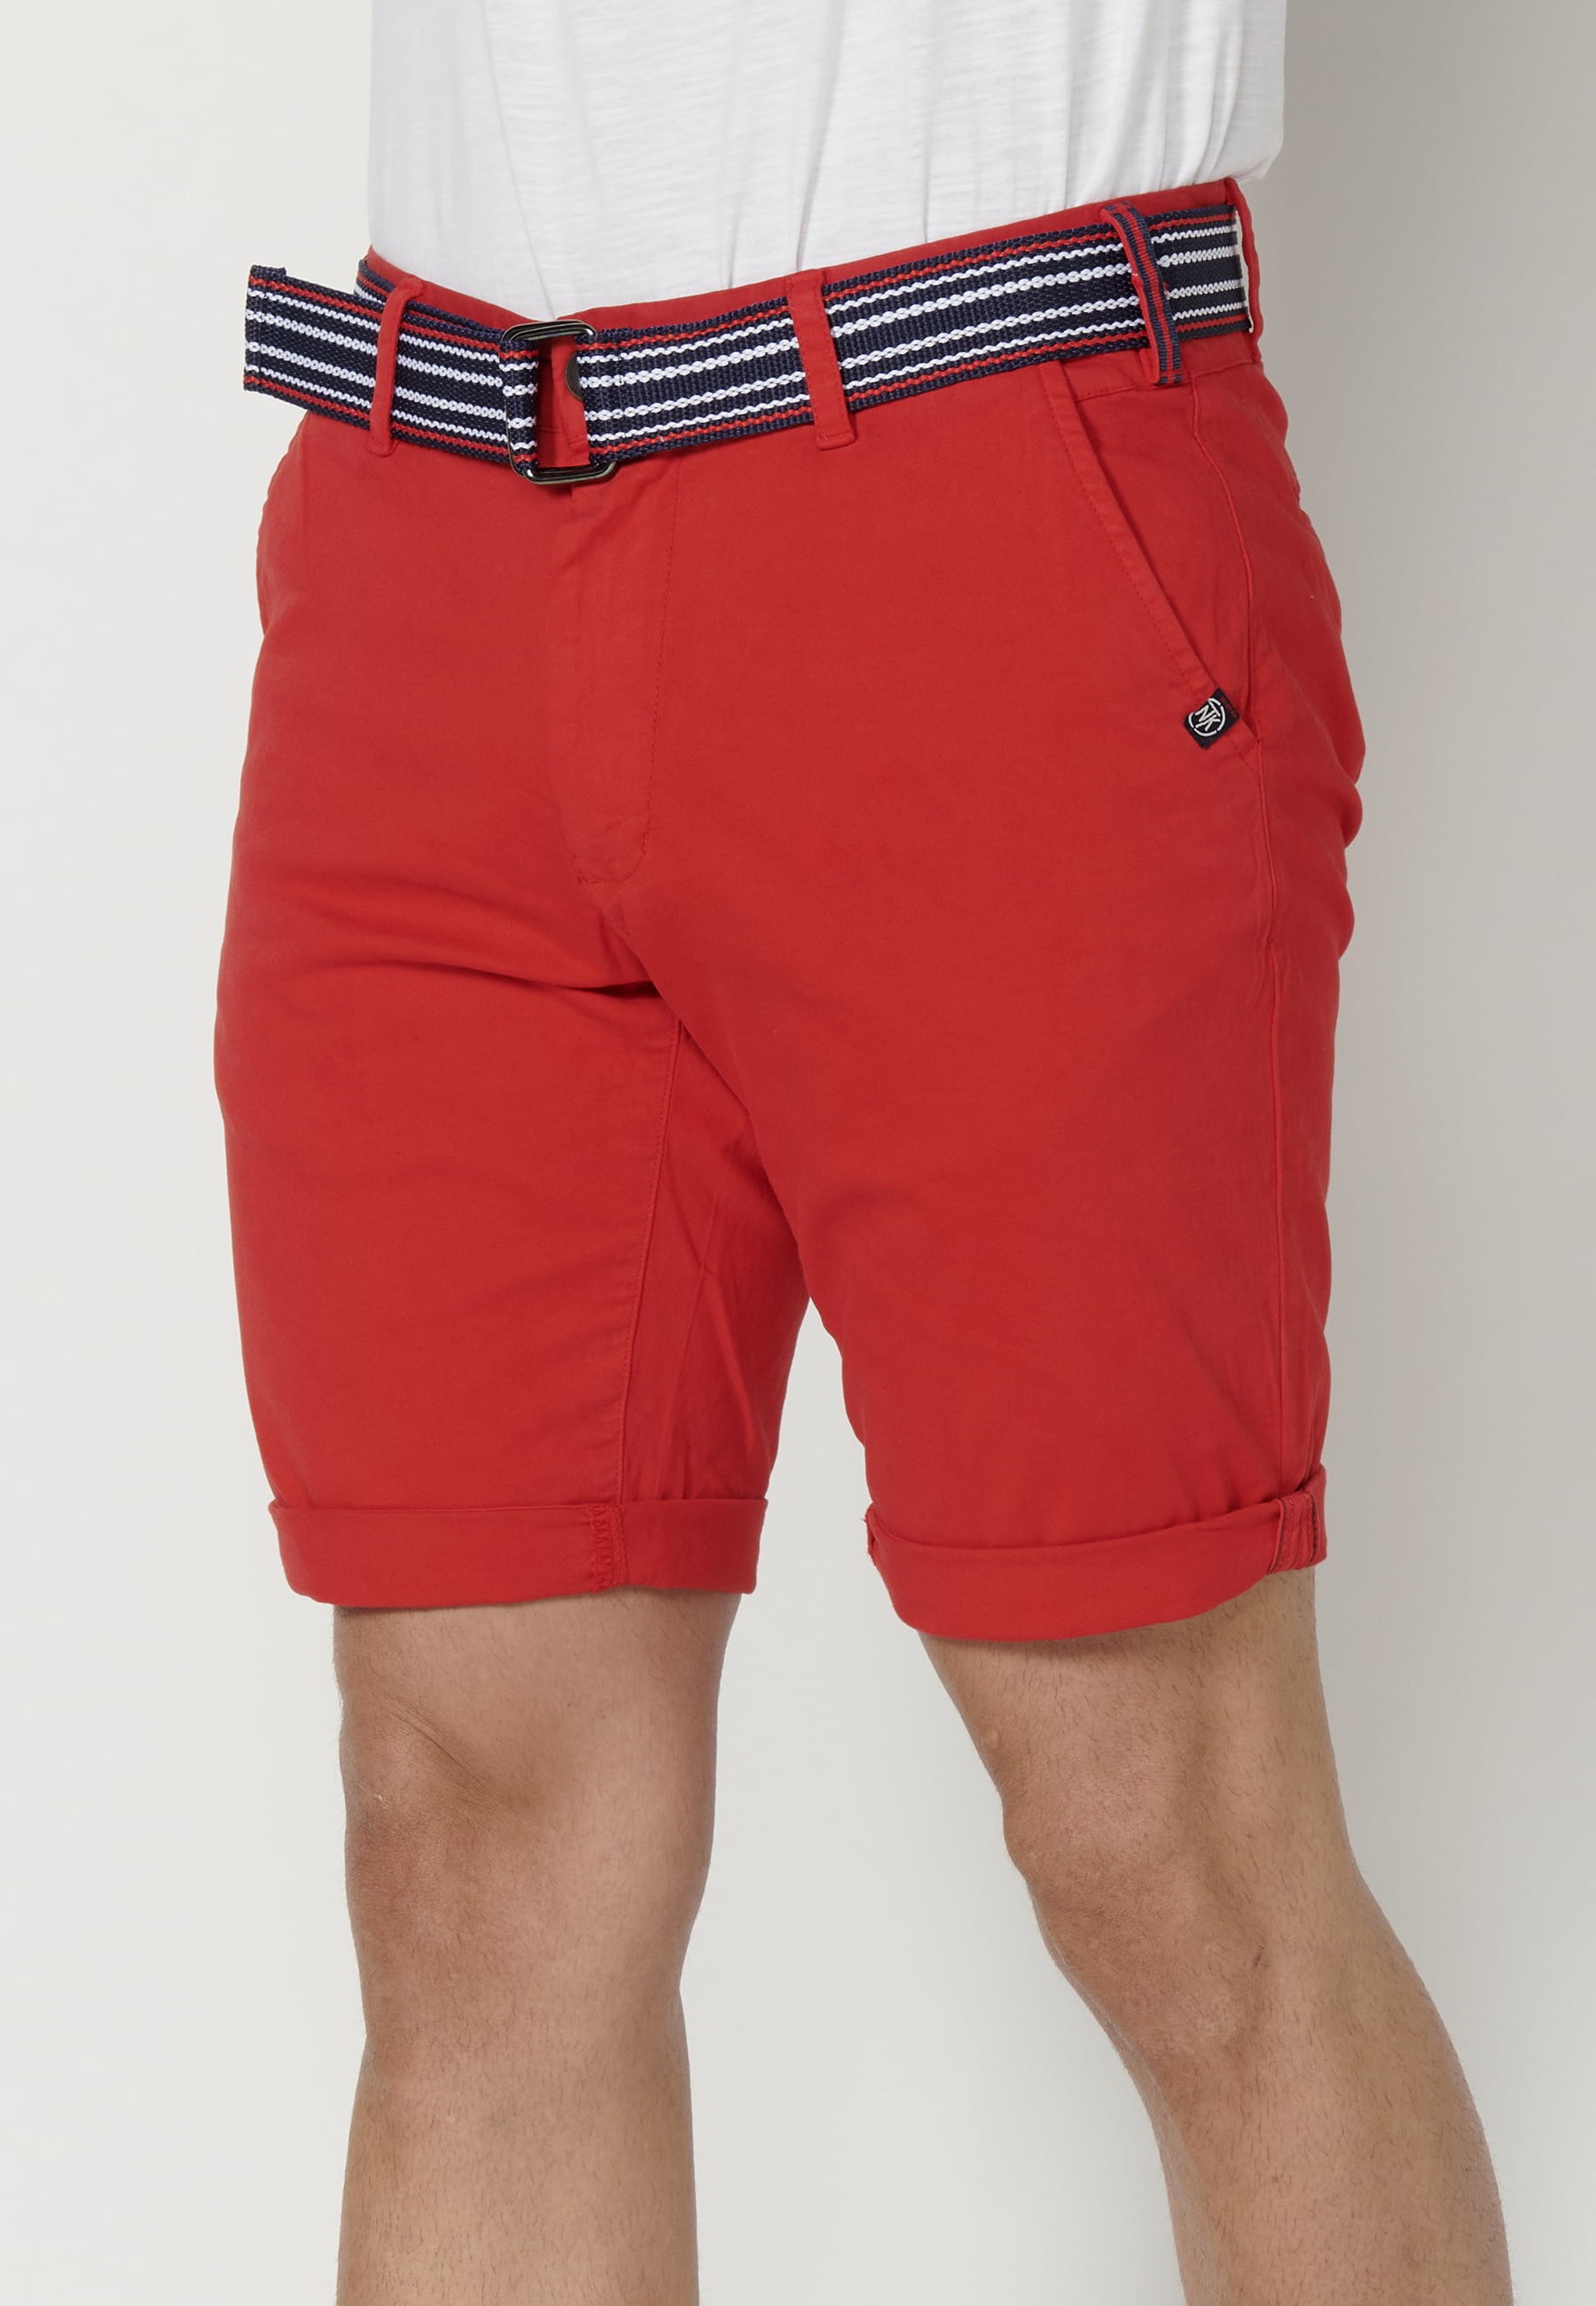 Red Chinese style Bermuda shorts for Men